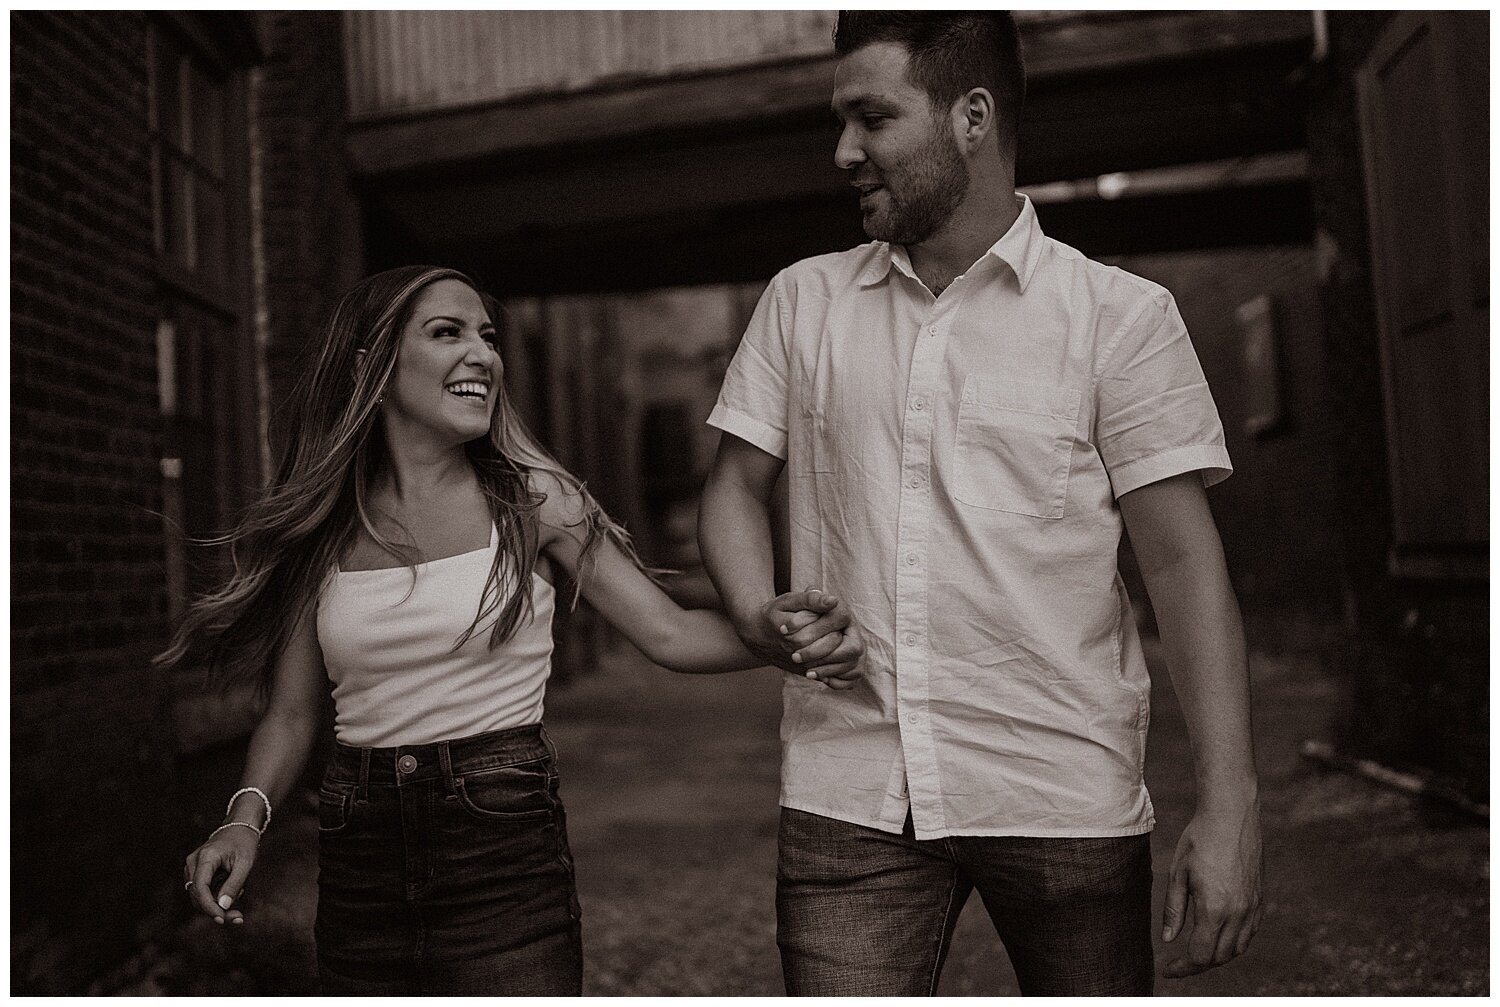 Cotton_Factory_And_Waterfall_Engagement_Session_Hamilton_Ontario_Wedding_Photographer_0028.jpg